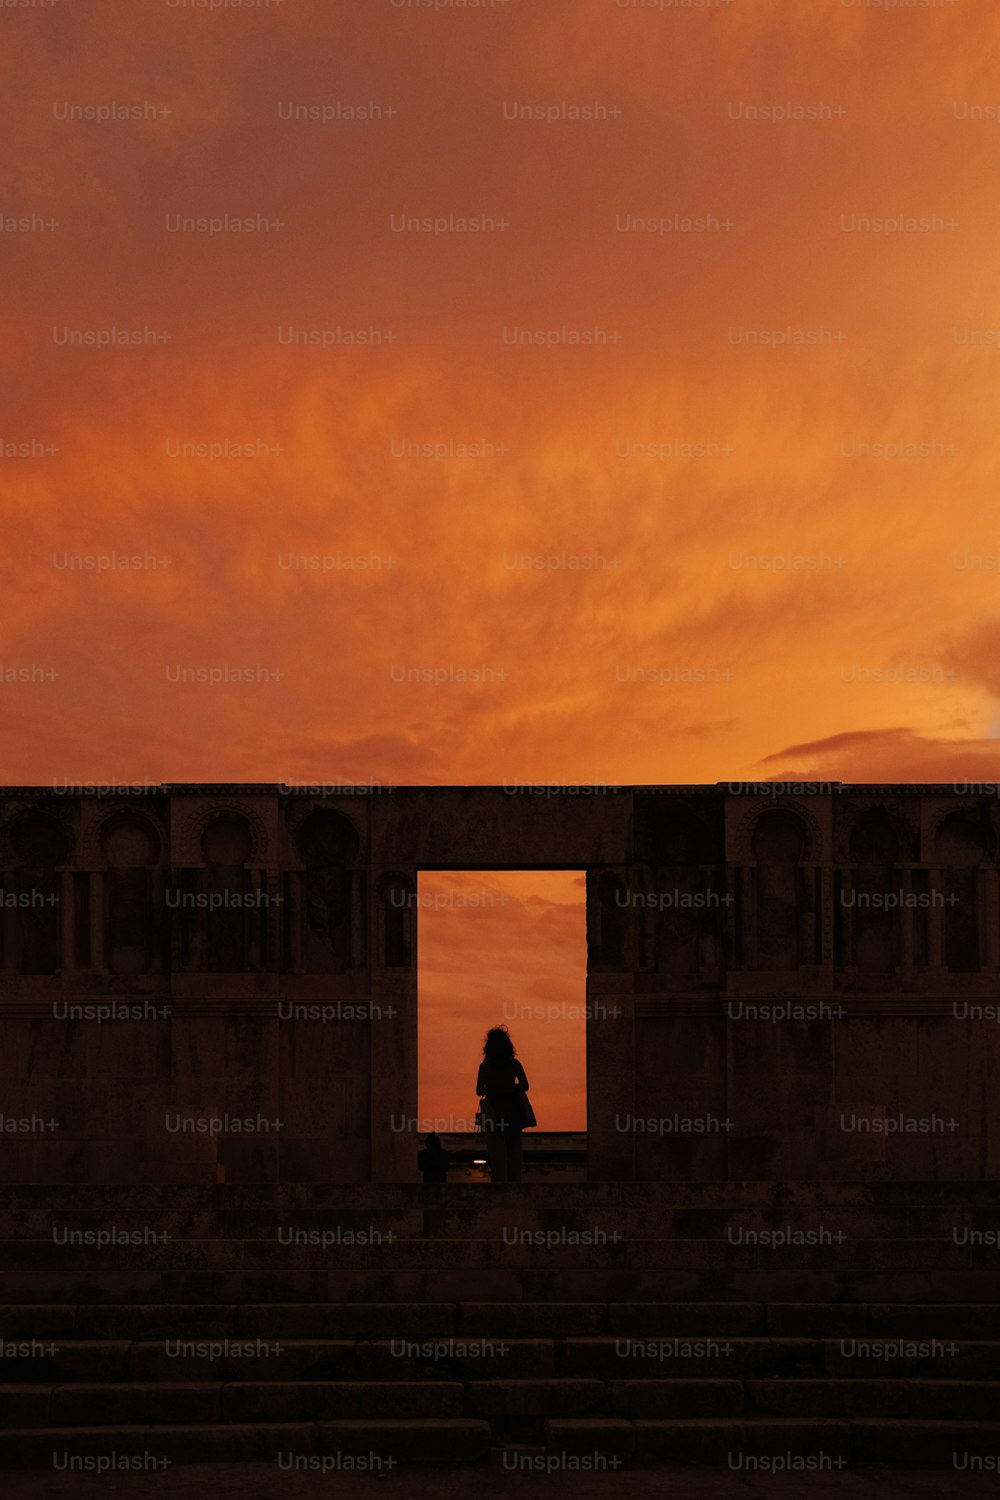 a person sitting on a bench watching the sunset